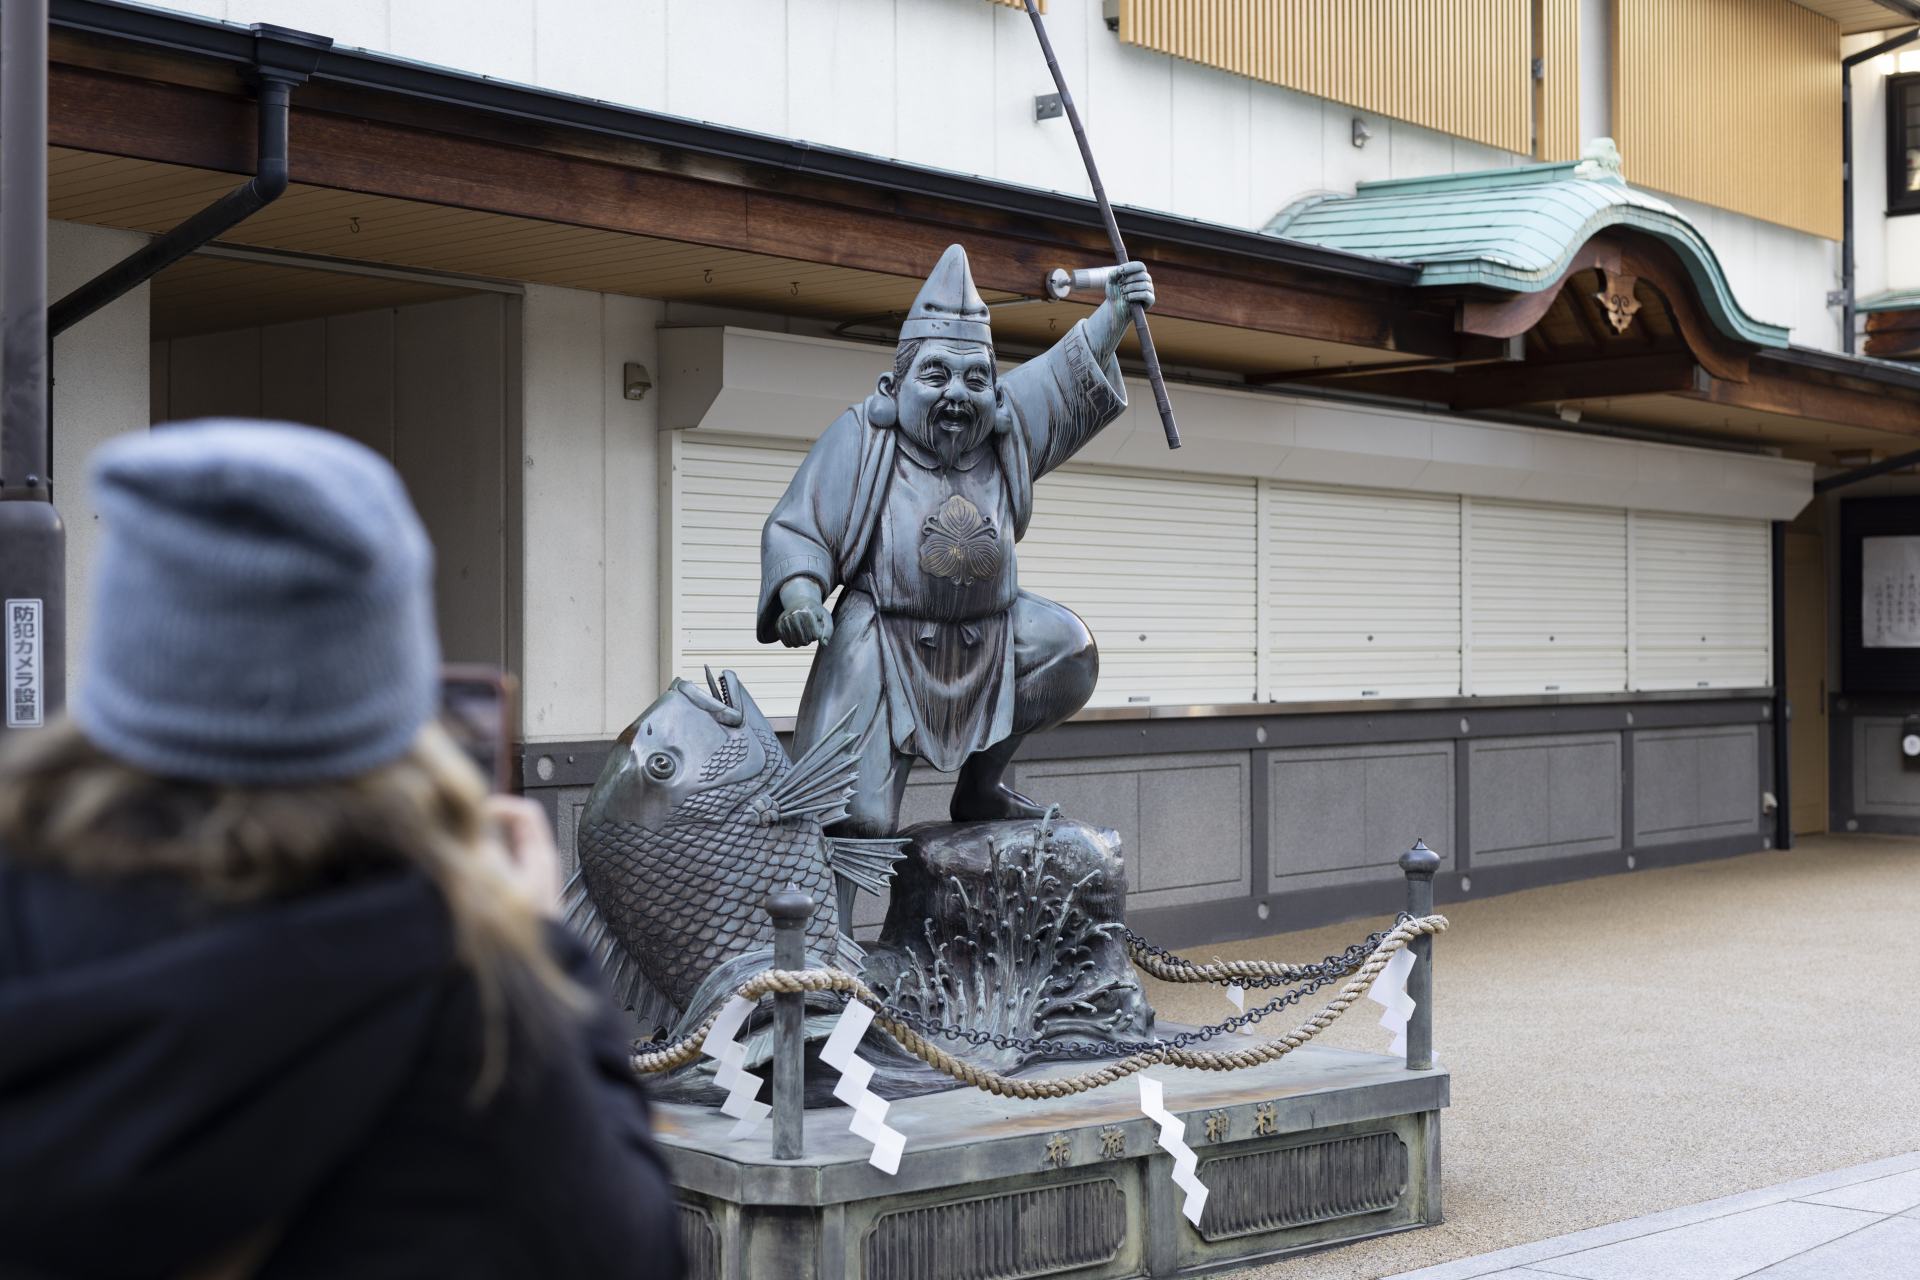 Amazed by the large statue of the deity, Ebisu, a symbol of wealth and prosperity for the merchants of Fuse.